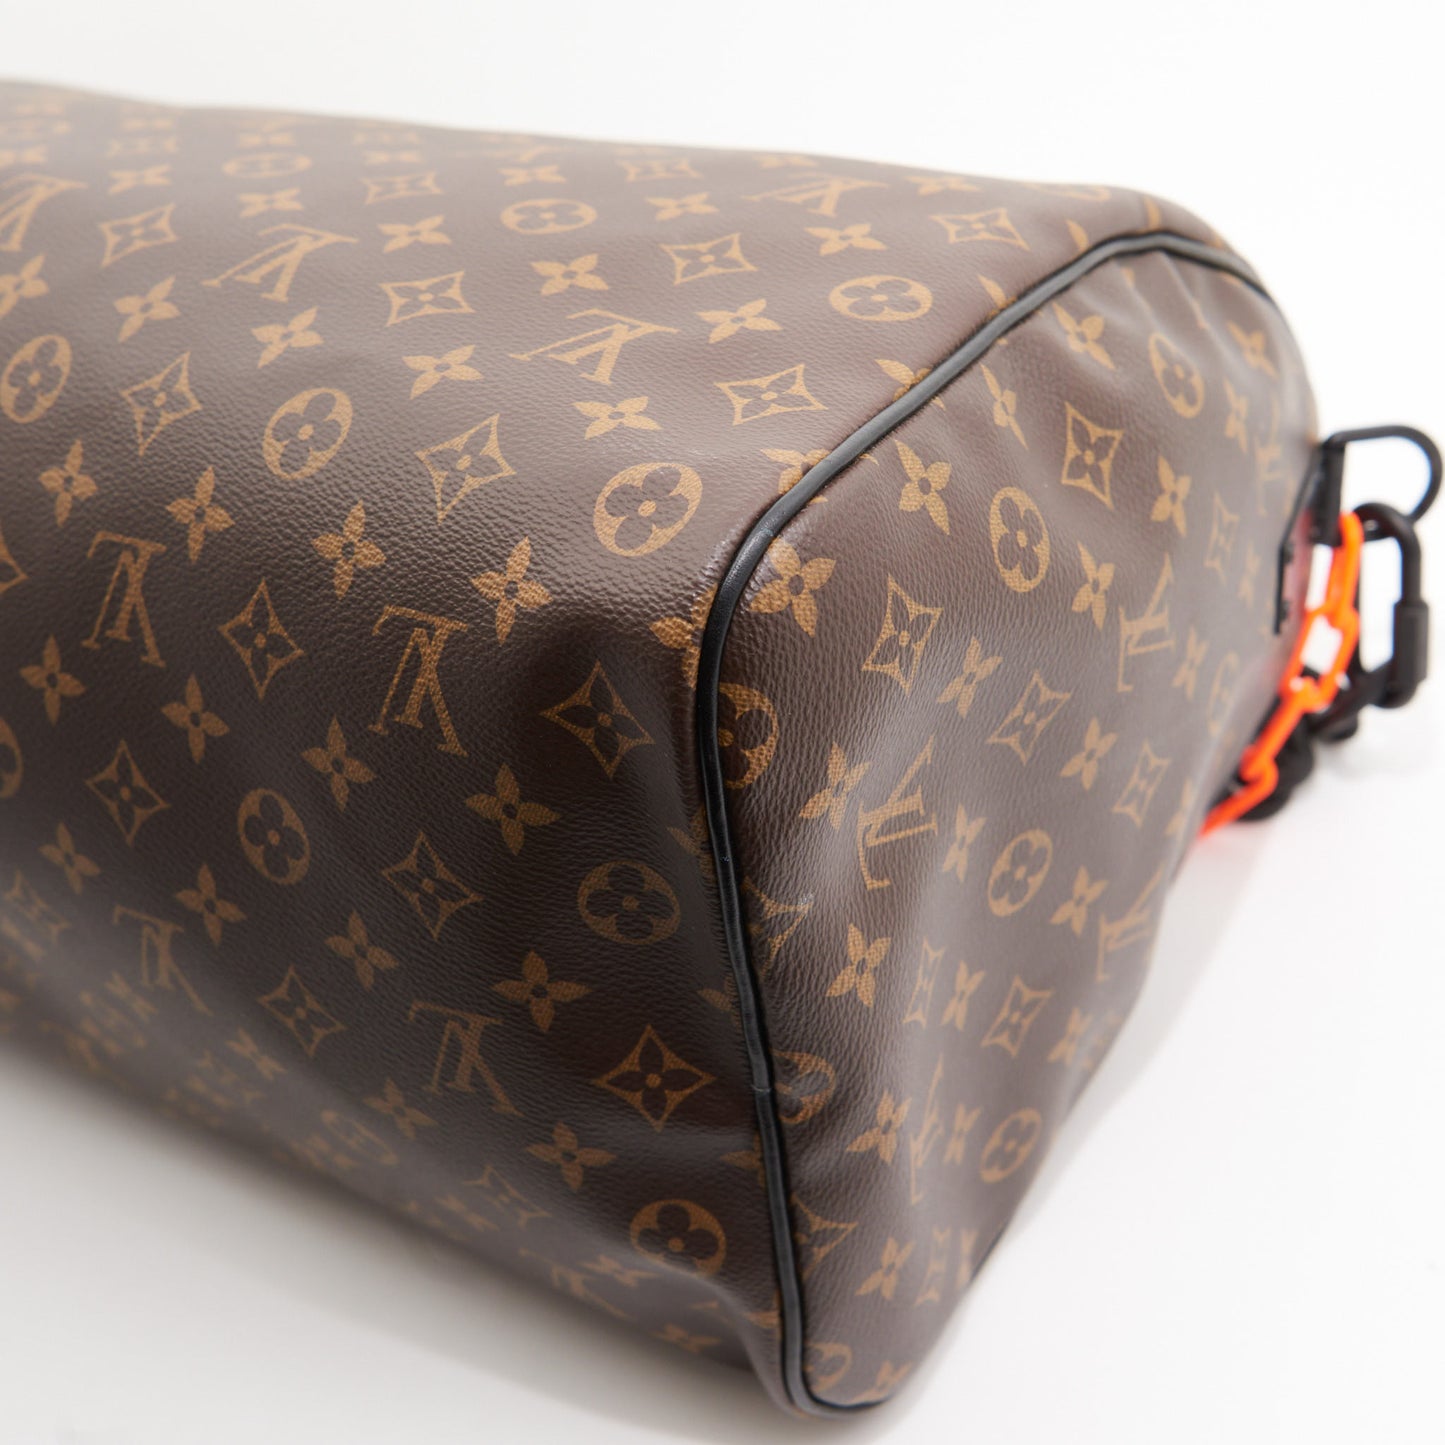 Louis Vuitton Limited Edition Keepall 50 in Monogram Canvas